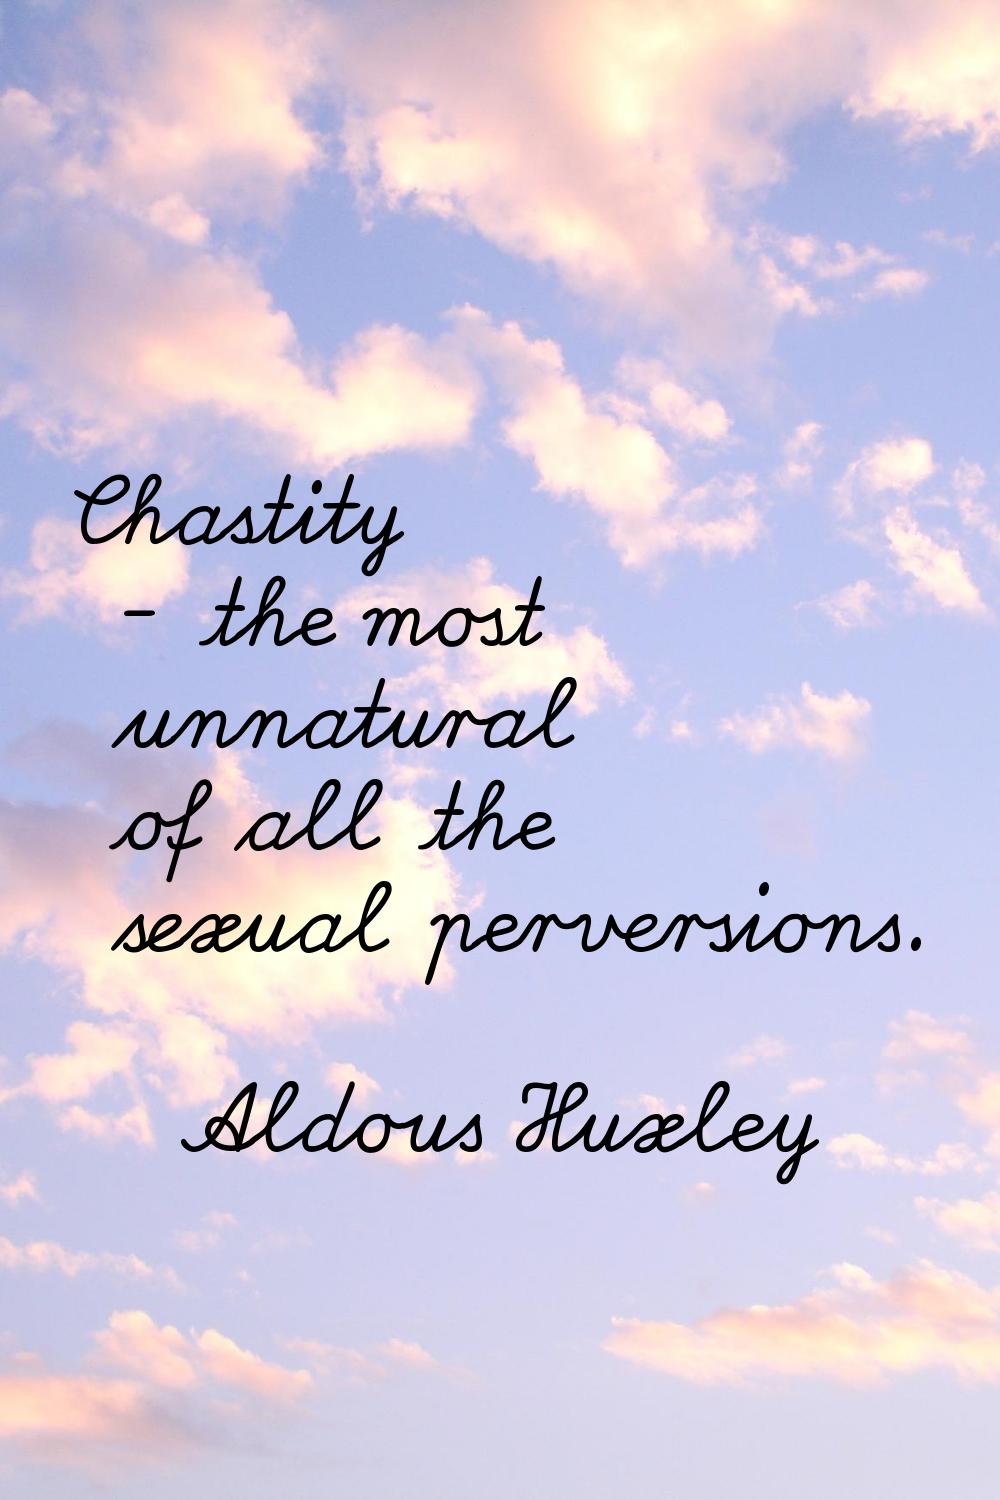 Chastity - the most unnatural of all the sexual perversions.